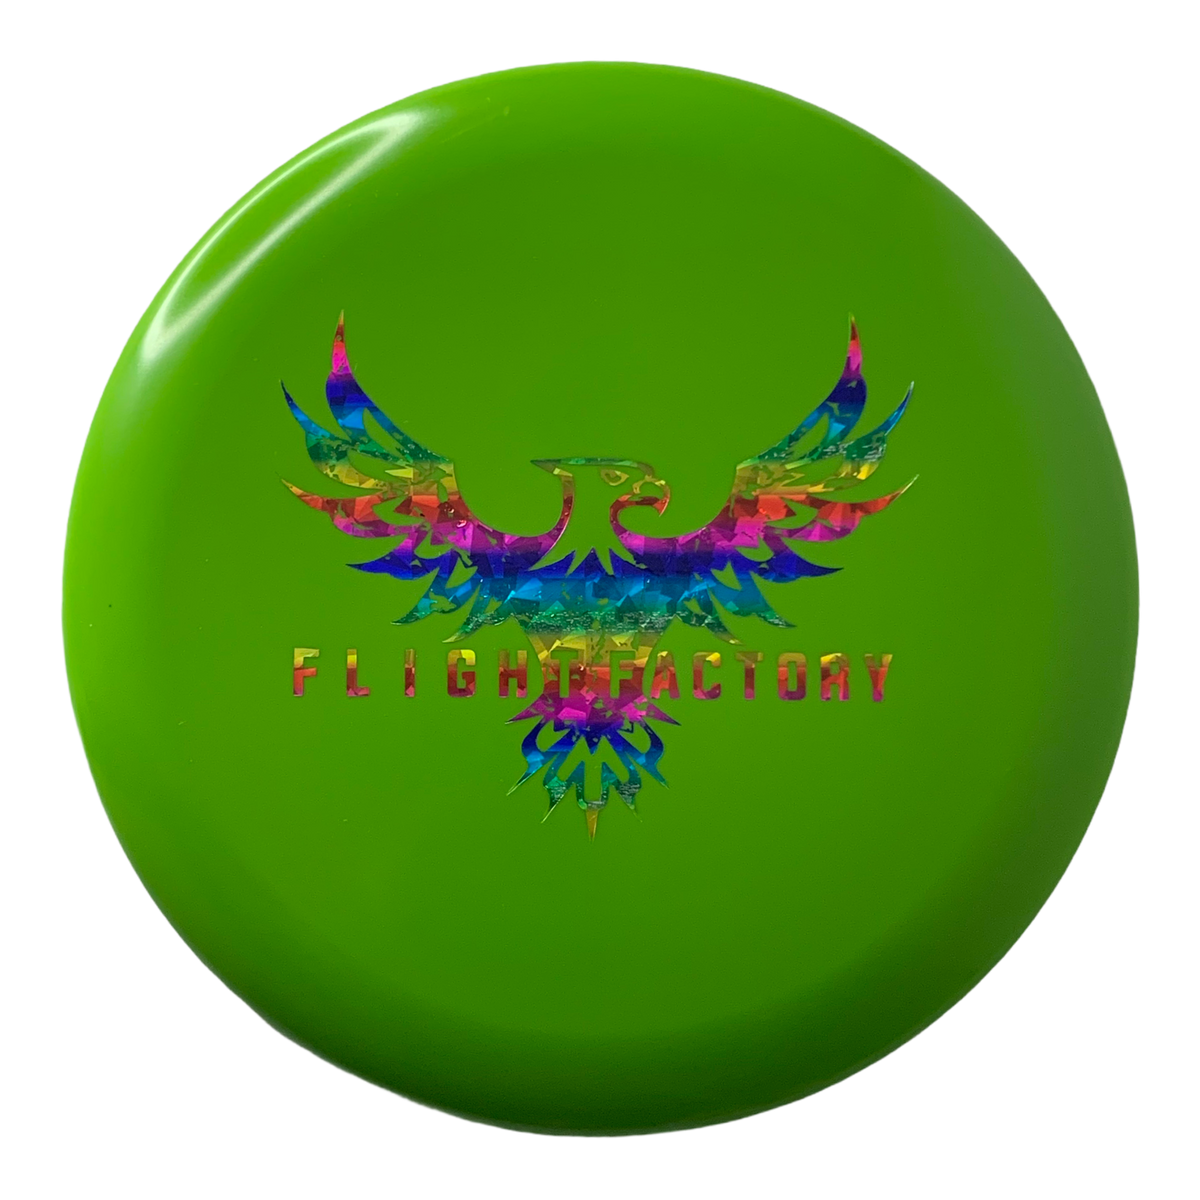 Flight Factory Eagle Legacy Icon Prowler